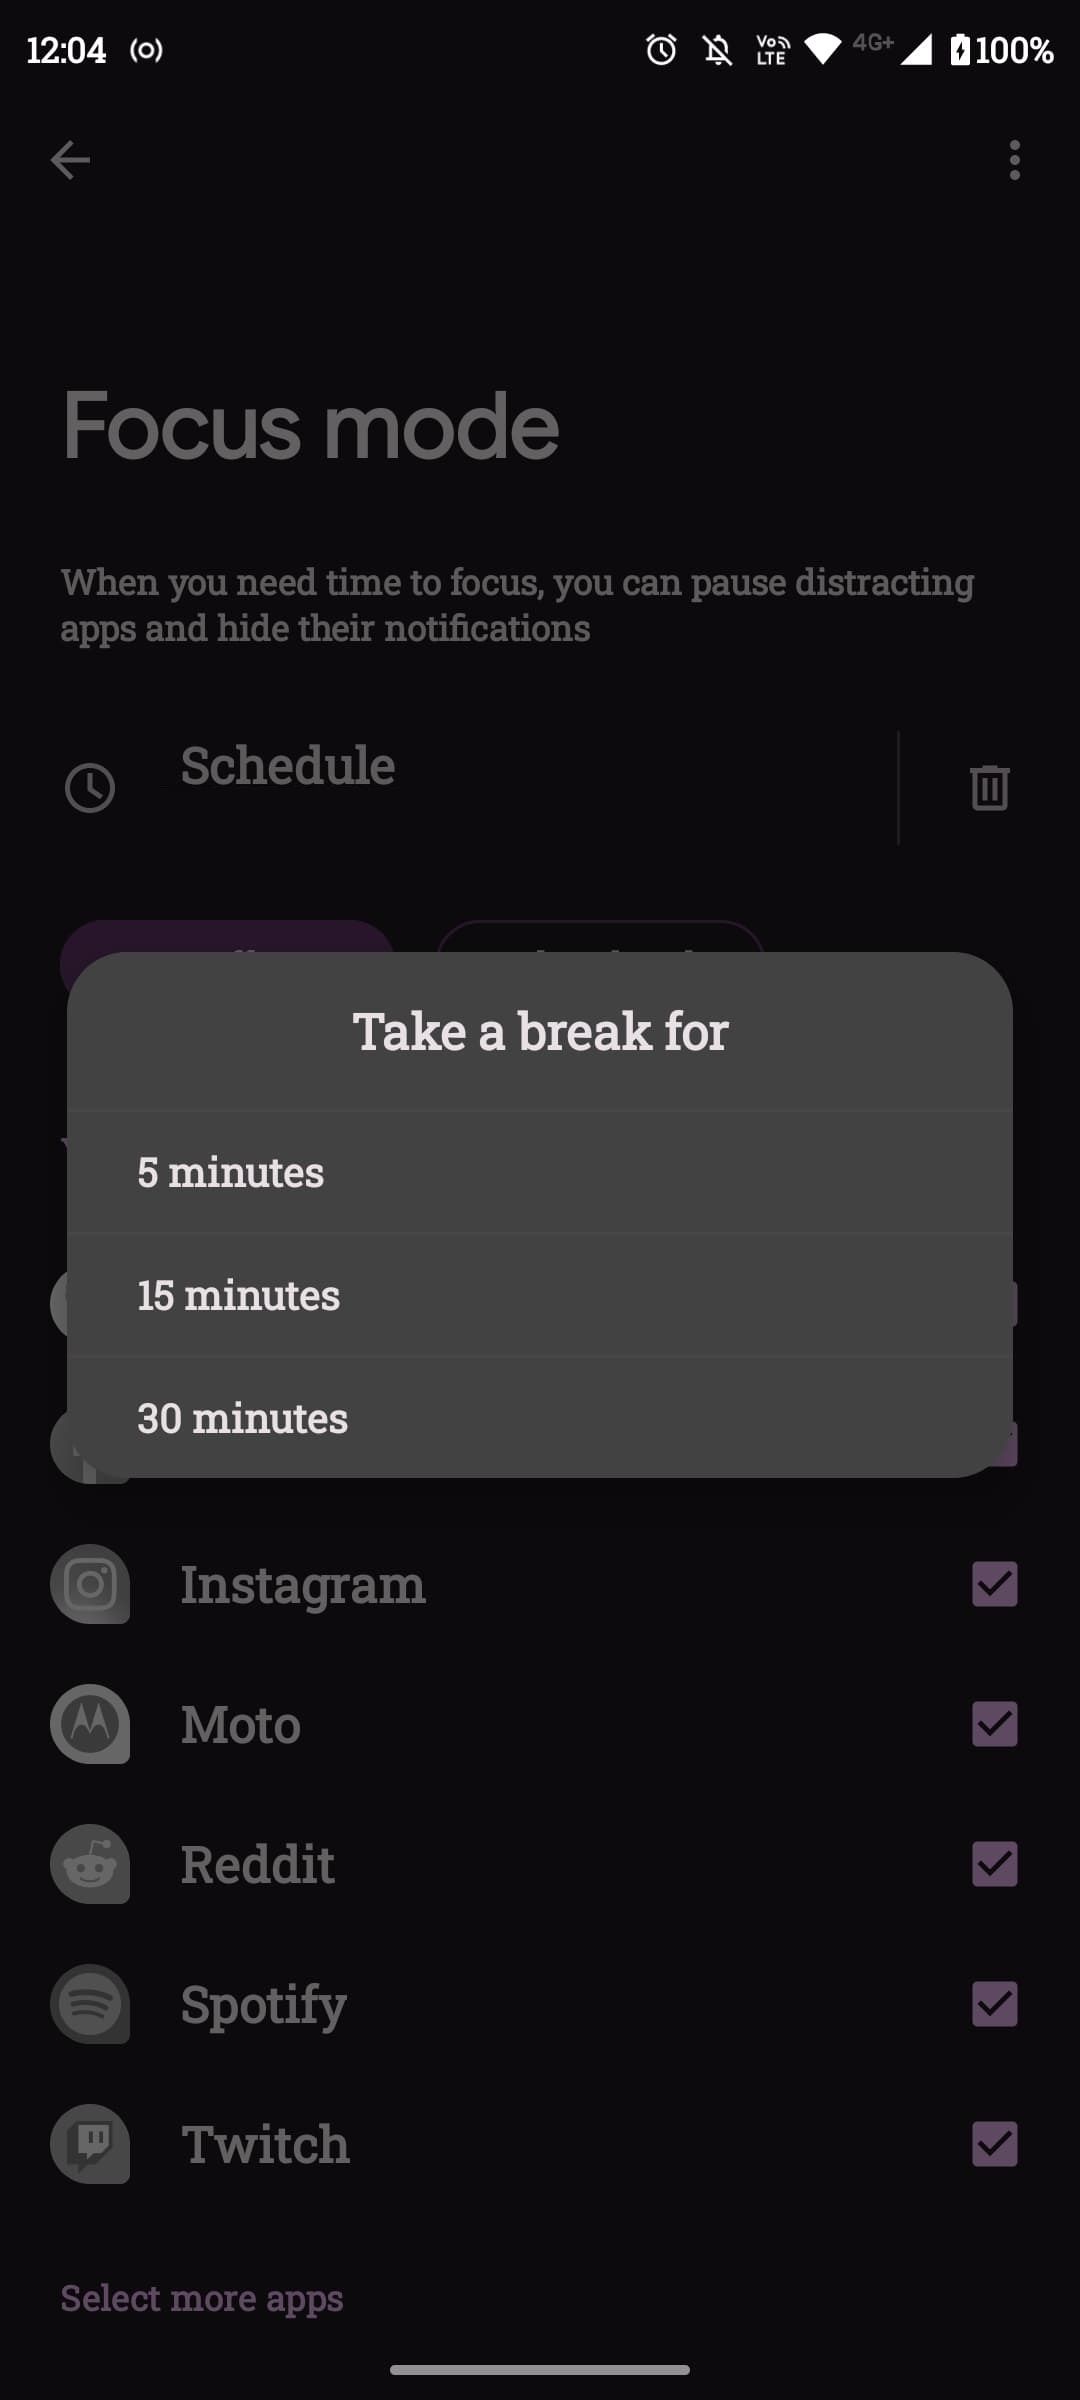 Options for taking a break from Focus mode